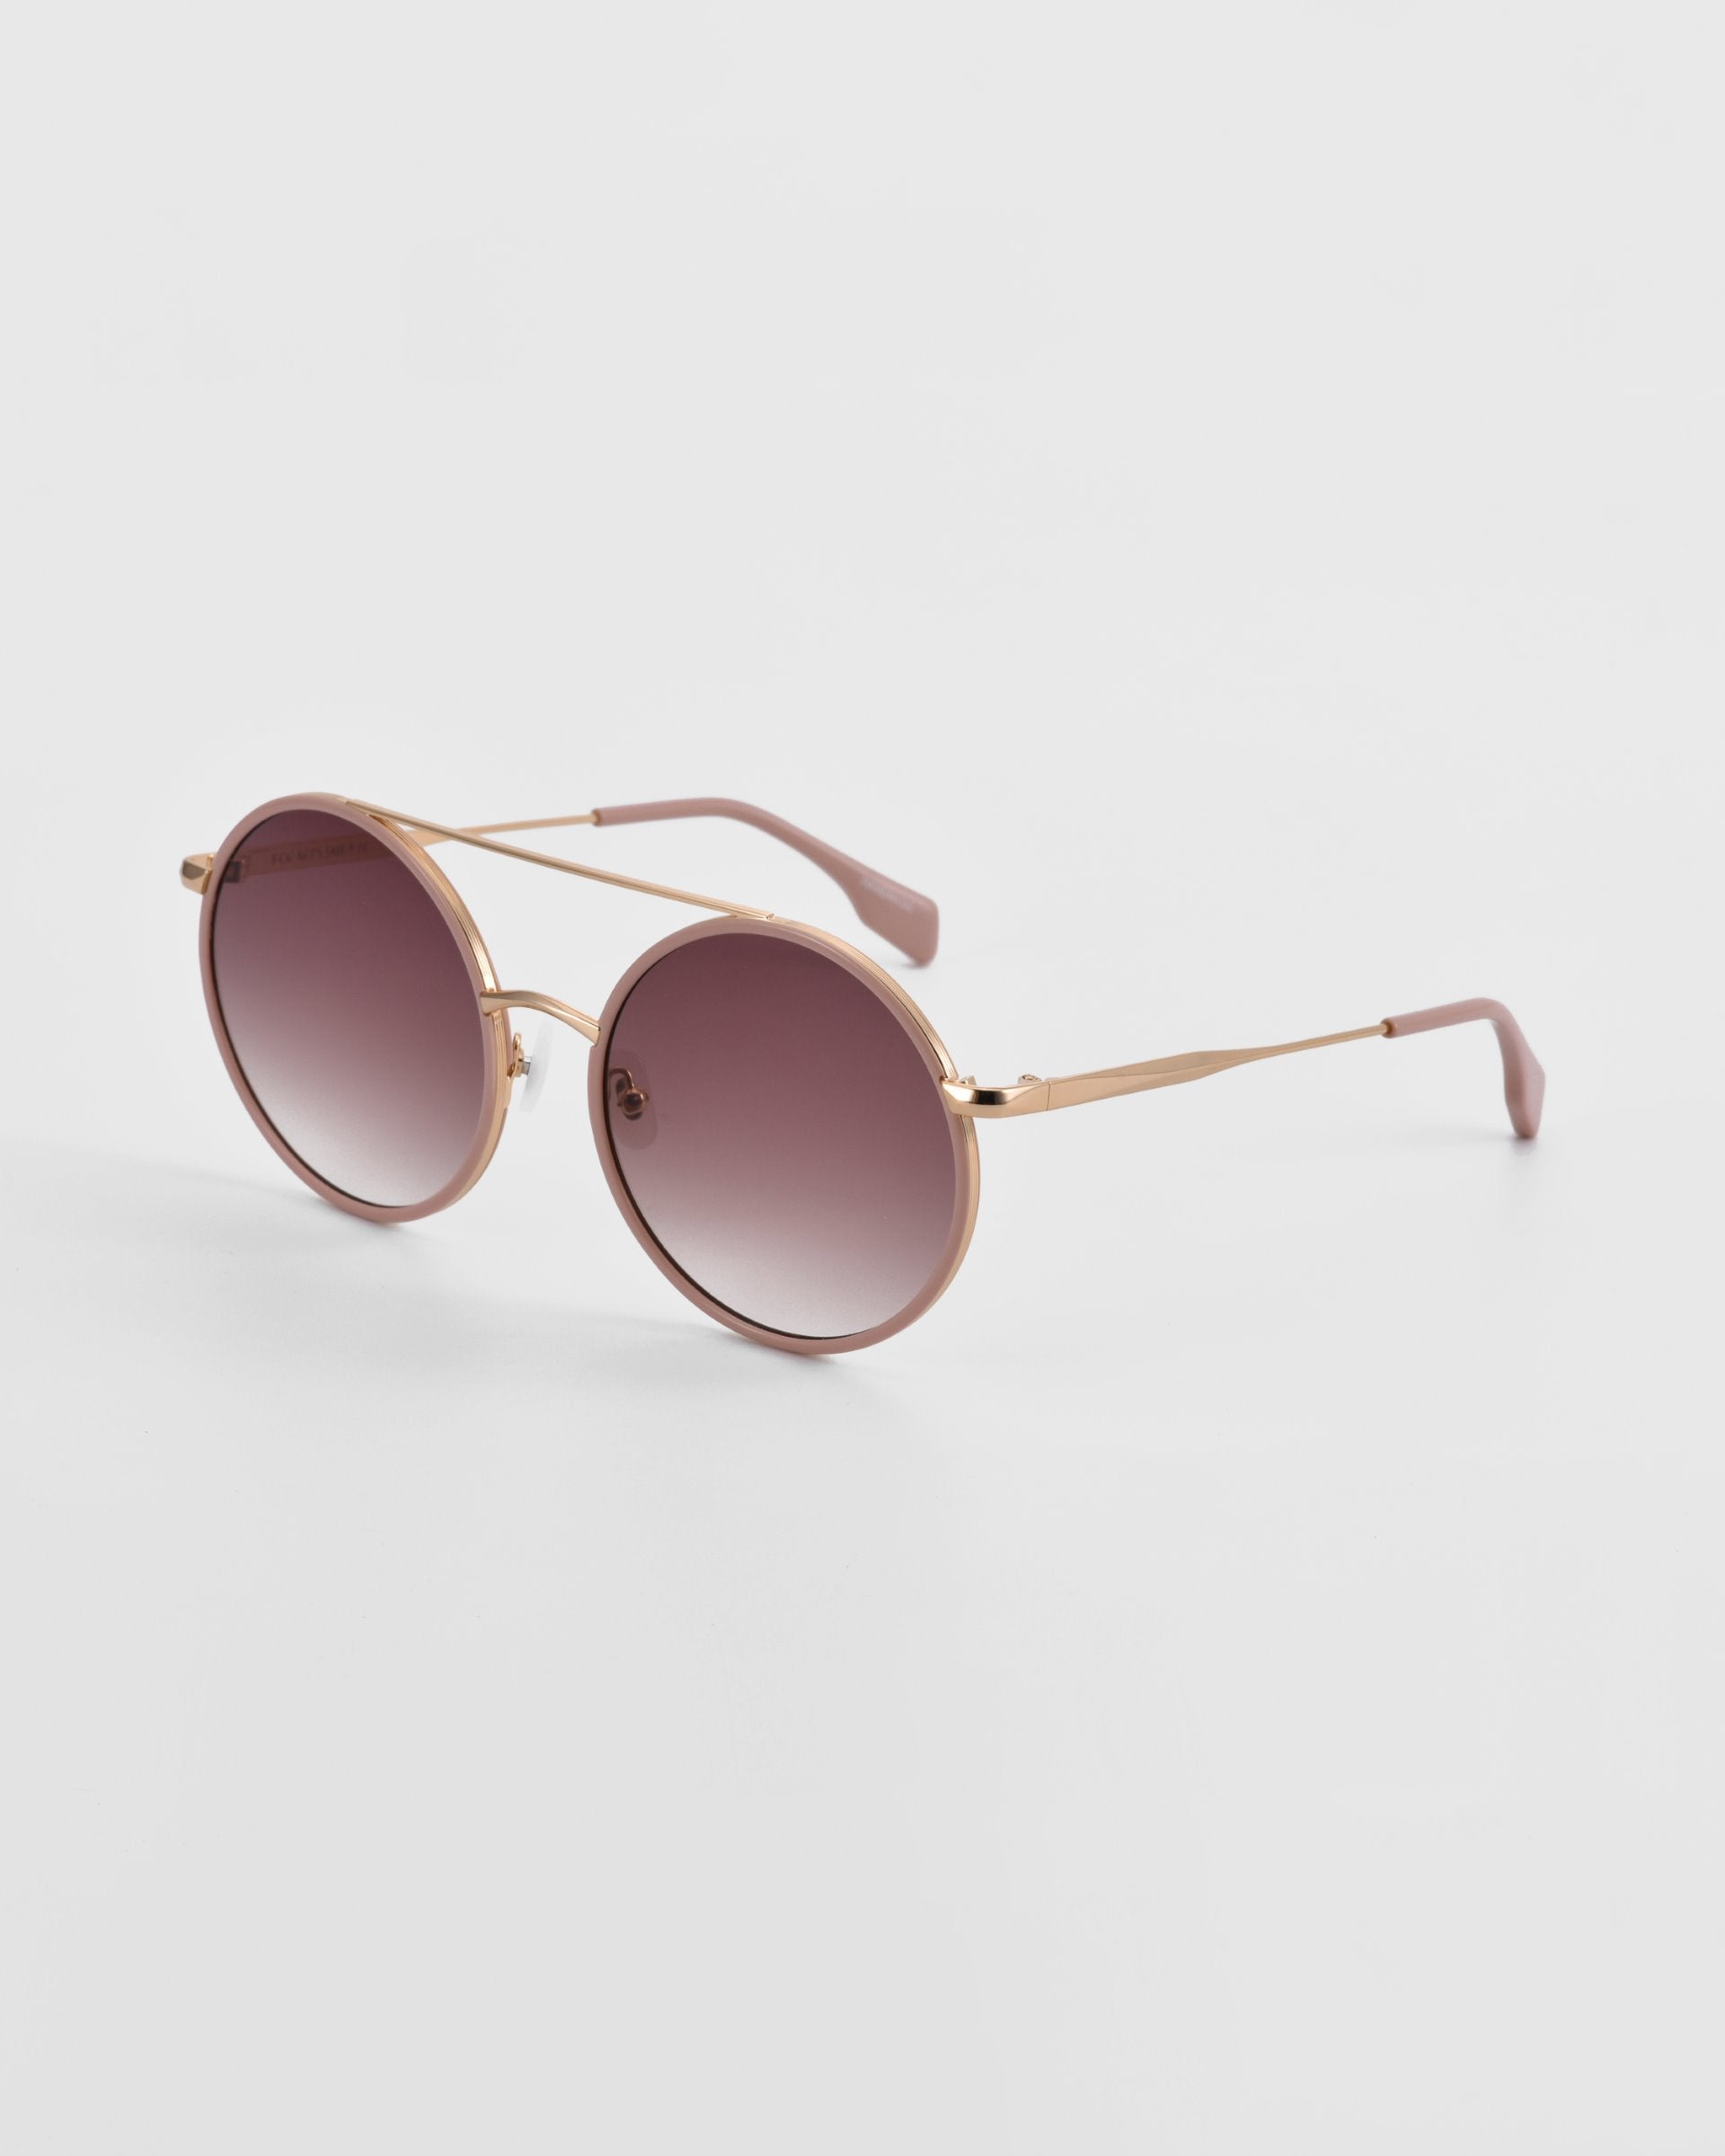 A pair of oversized round aviator sunglasses with a rose gold metal frame and gradient lenses transitioning from dark purple to light pink. Featuring jade-stone nose pads, the arms have brown tips, and the For Art's Sake® Orb sunglasses are positioned on a plain white background.